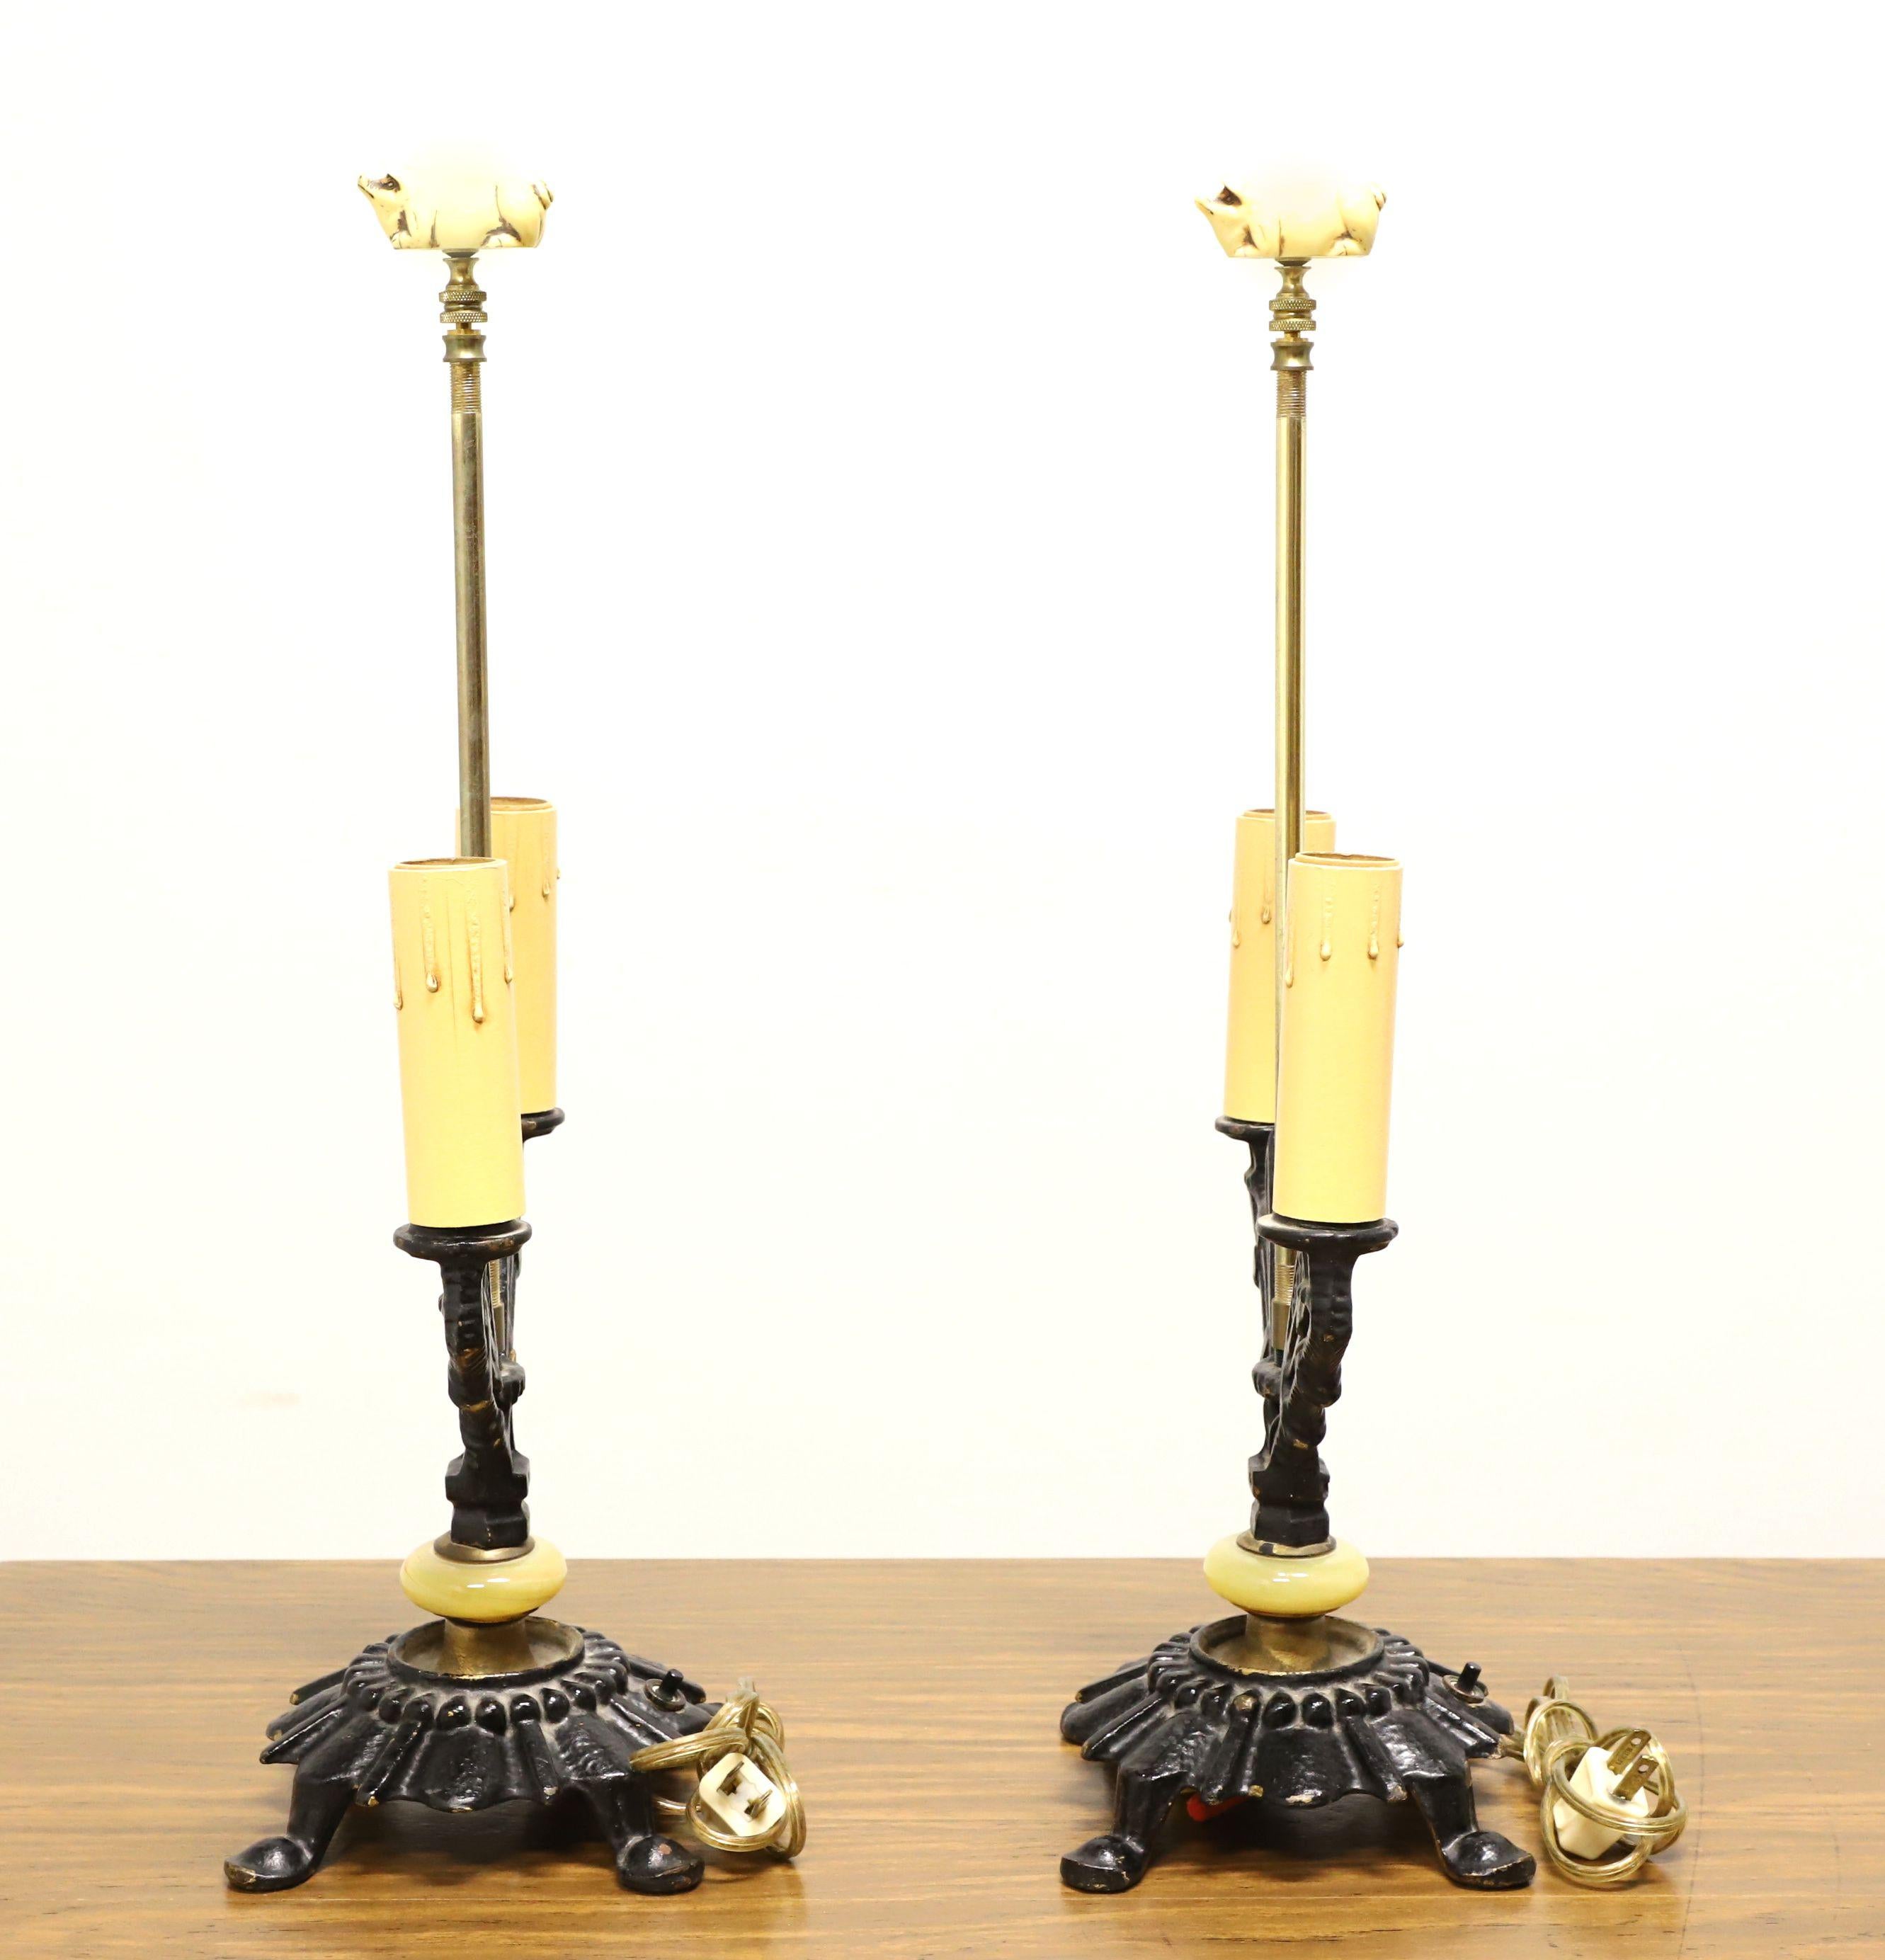 American Antique Art Deco Black Painted Metal Double Candlestick Table Lamps - Pair For Sale